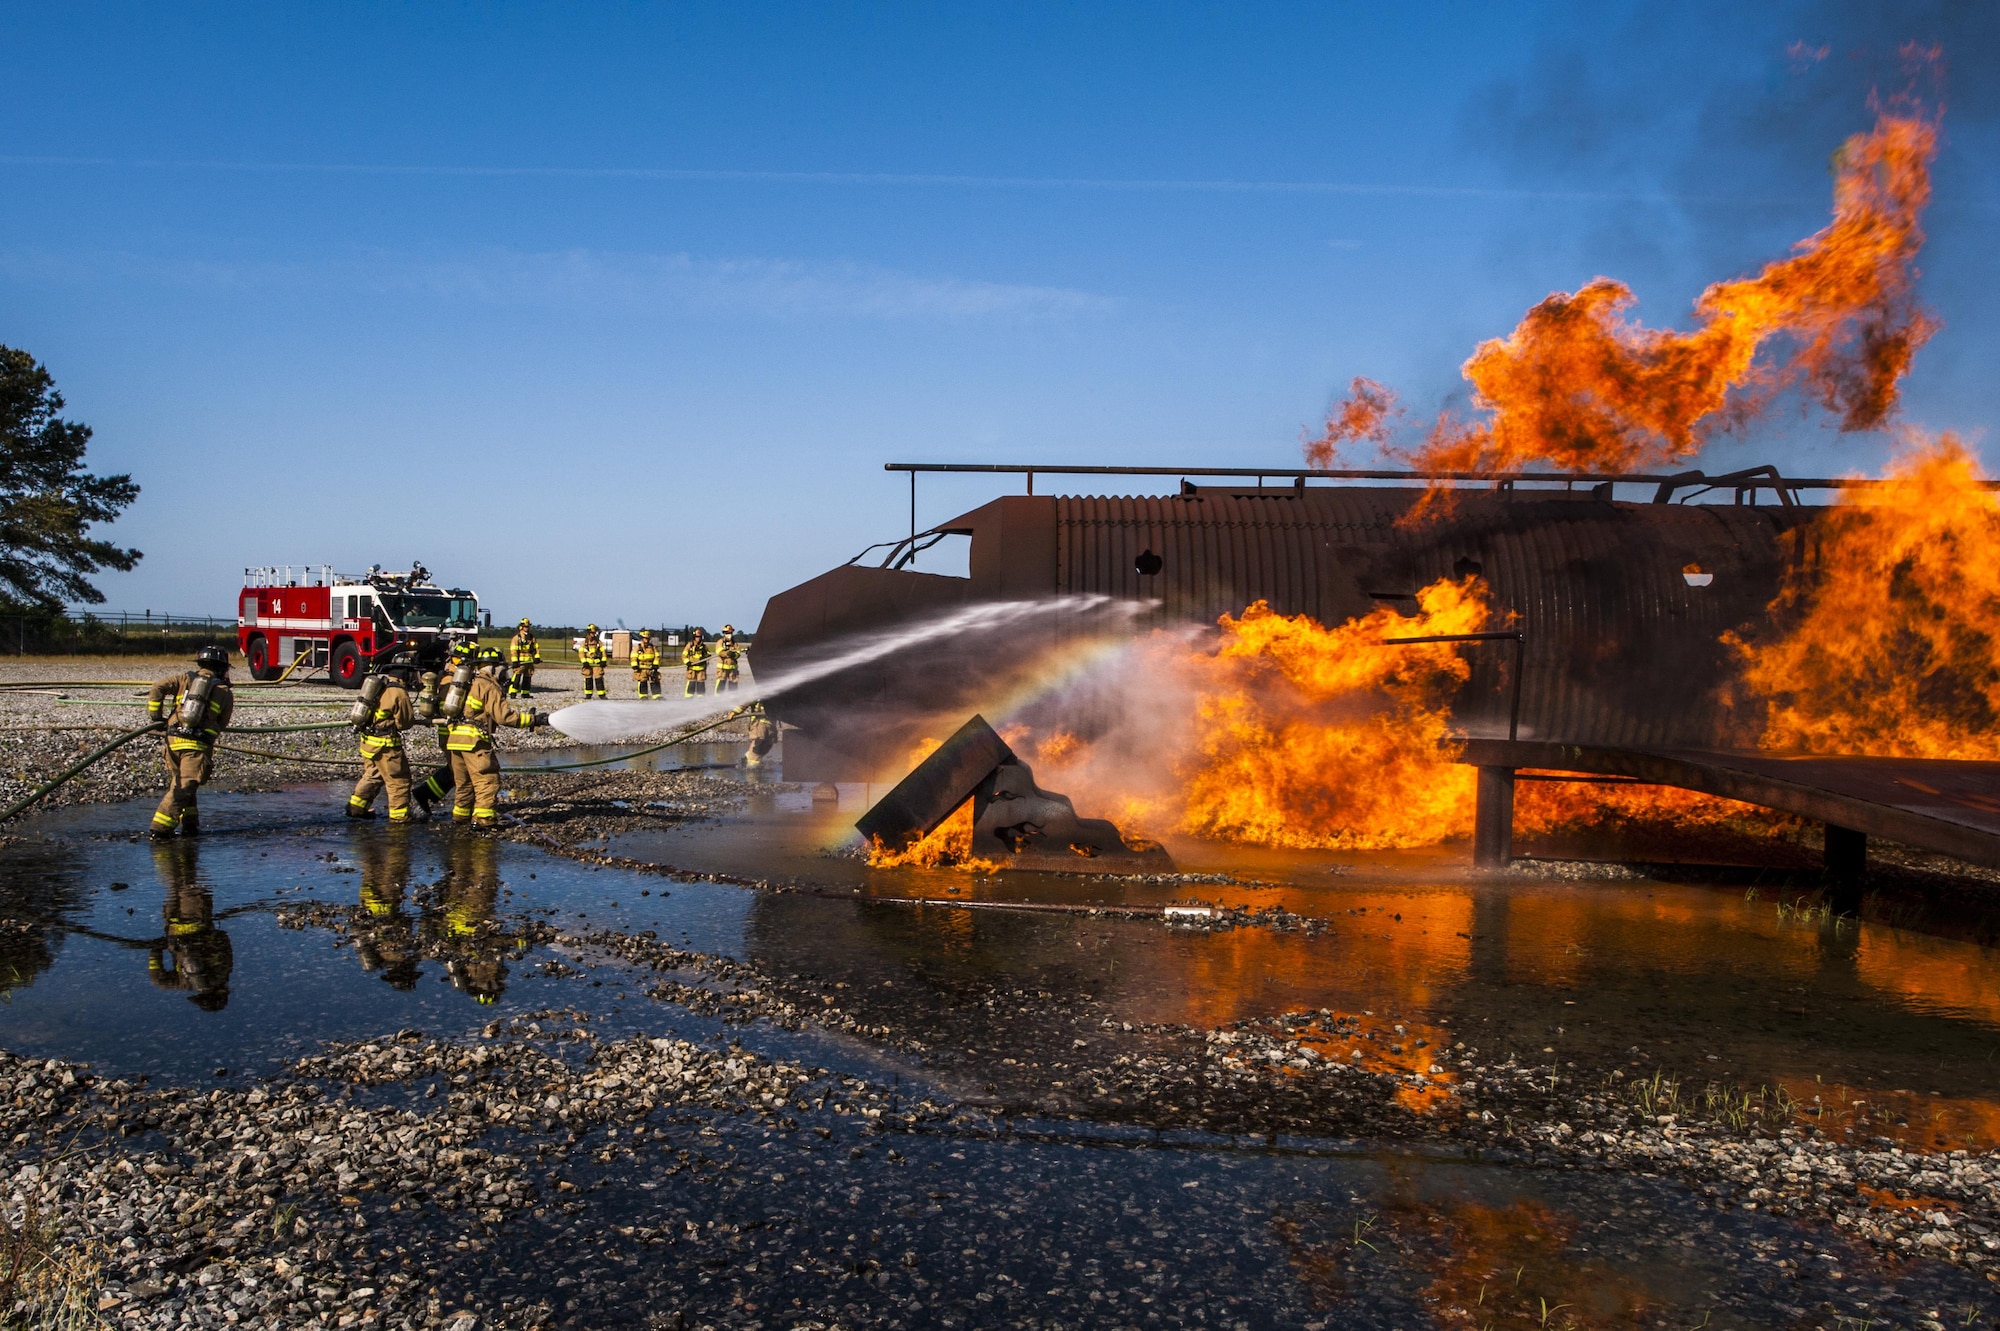 Firefighters from the 23d Civil Engineer Squadron and the Valdosta Fire Department extinguish a fire during aircraft live fire training, April 26, 2016, at Moody Air Force Base, Ga. Moody’s firefighters maintain a working relationship with the VFD in order to know what to expect from each other when combatting a fire together in a real world situation. (U.S. Air Force photo by Airman 1st Class Lauren M. Hunter/Released)